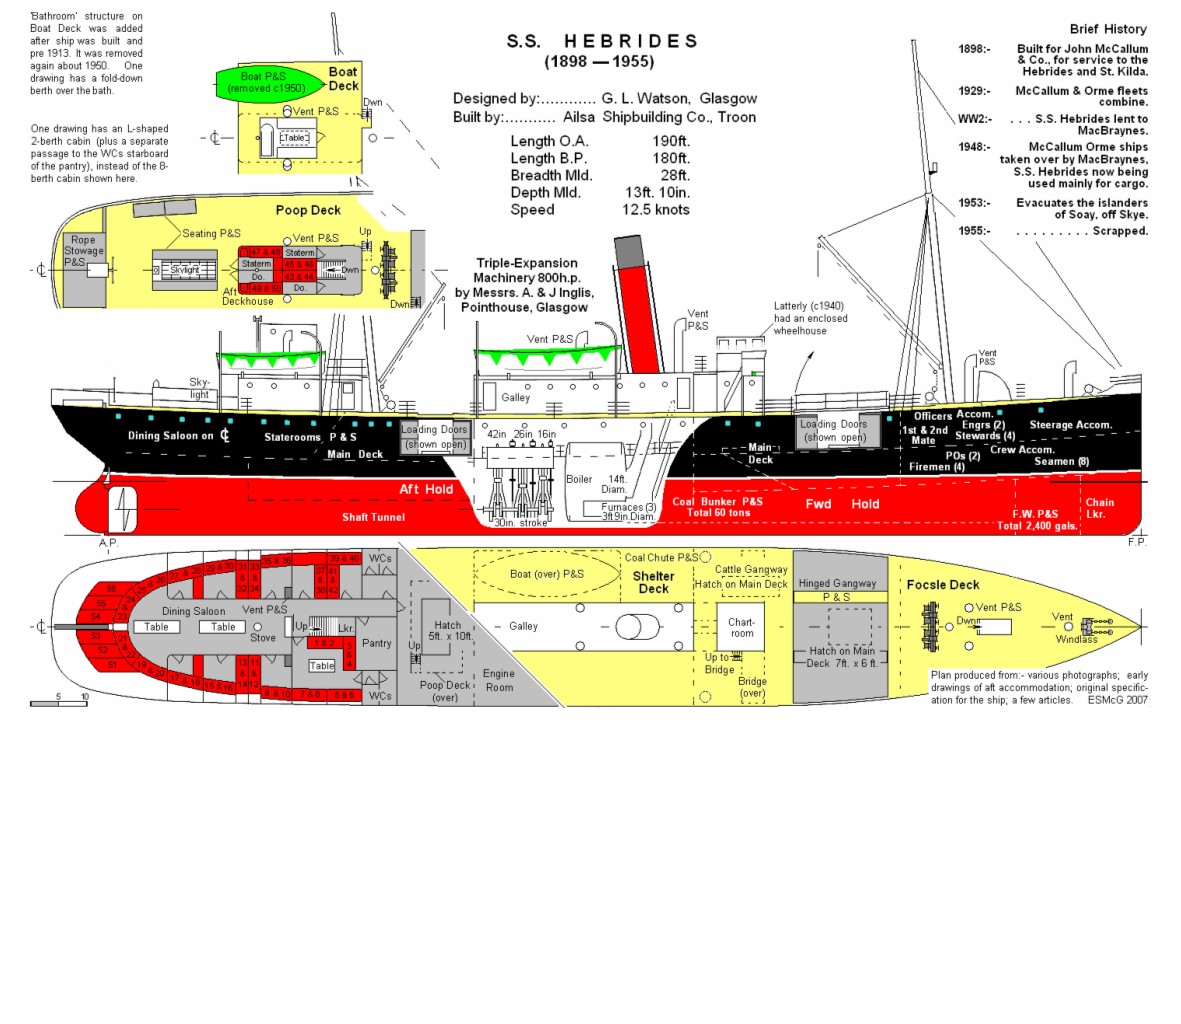 Ewen McGee (Click on the image below to see the full size plan)